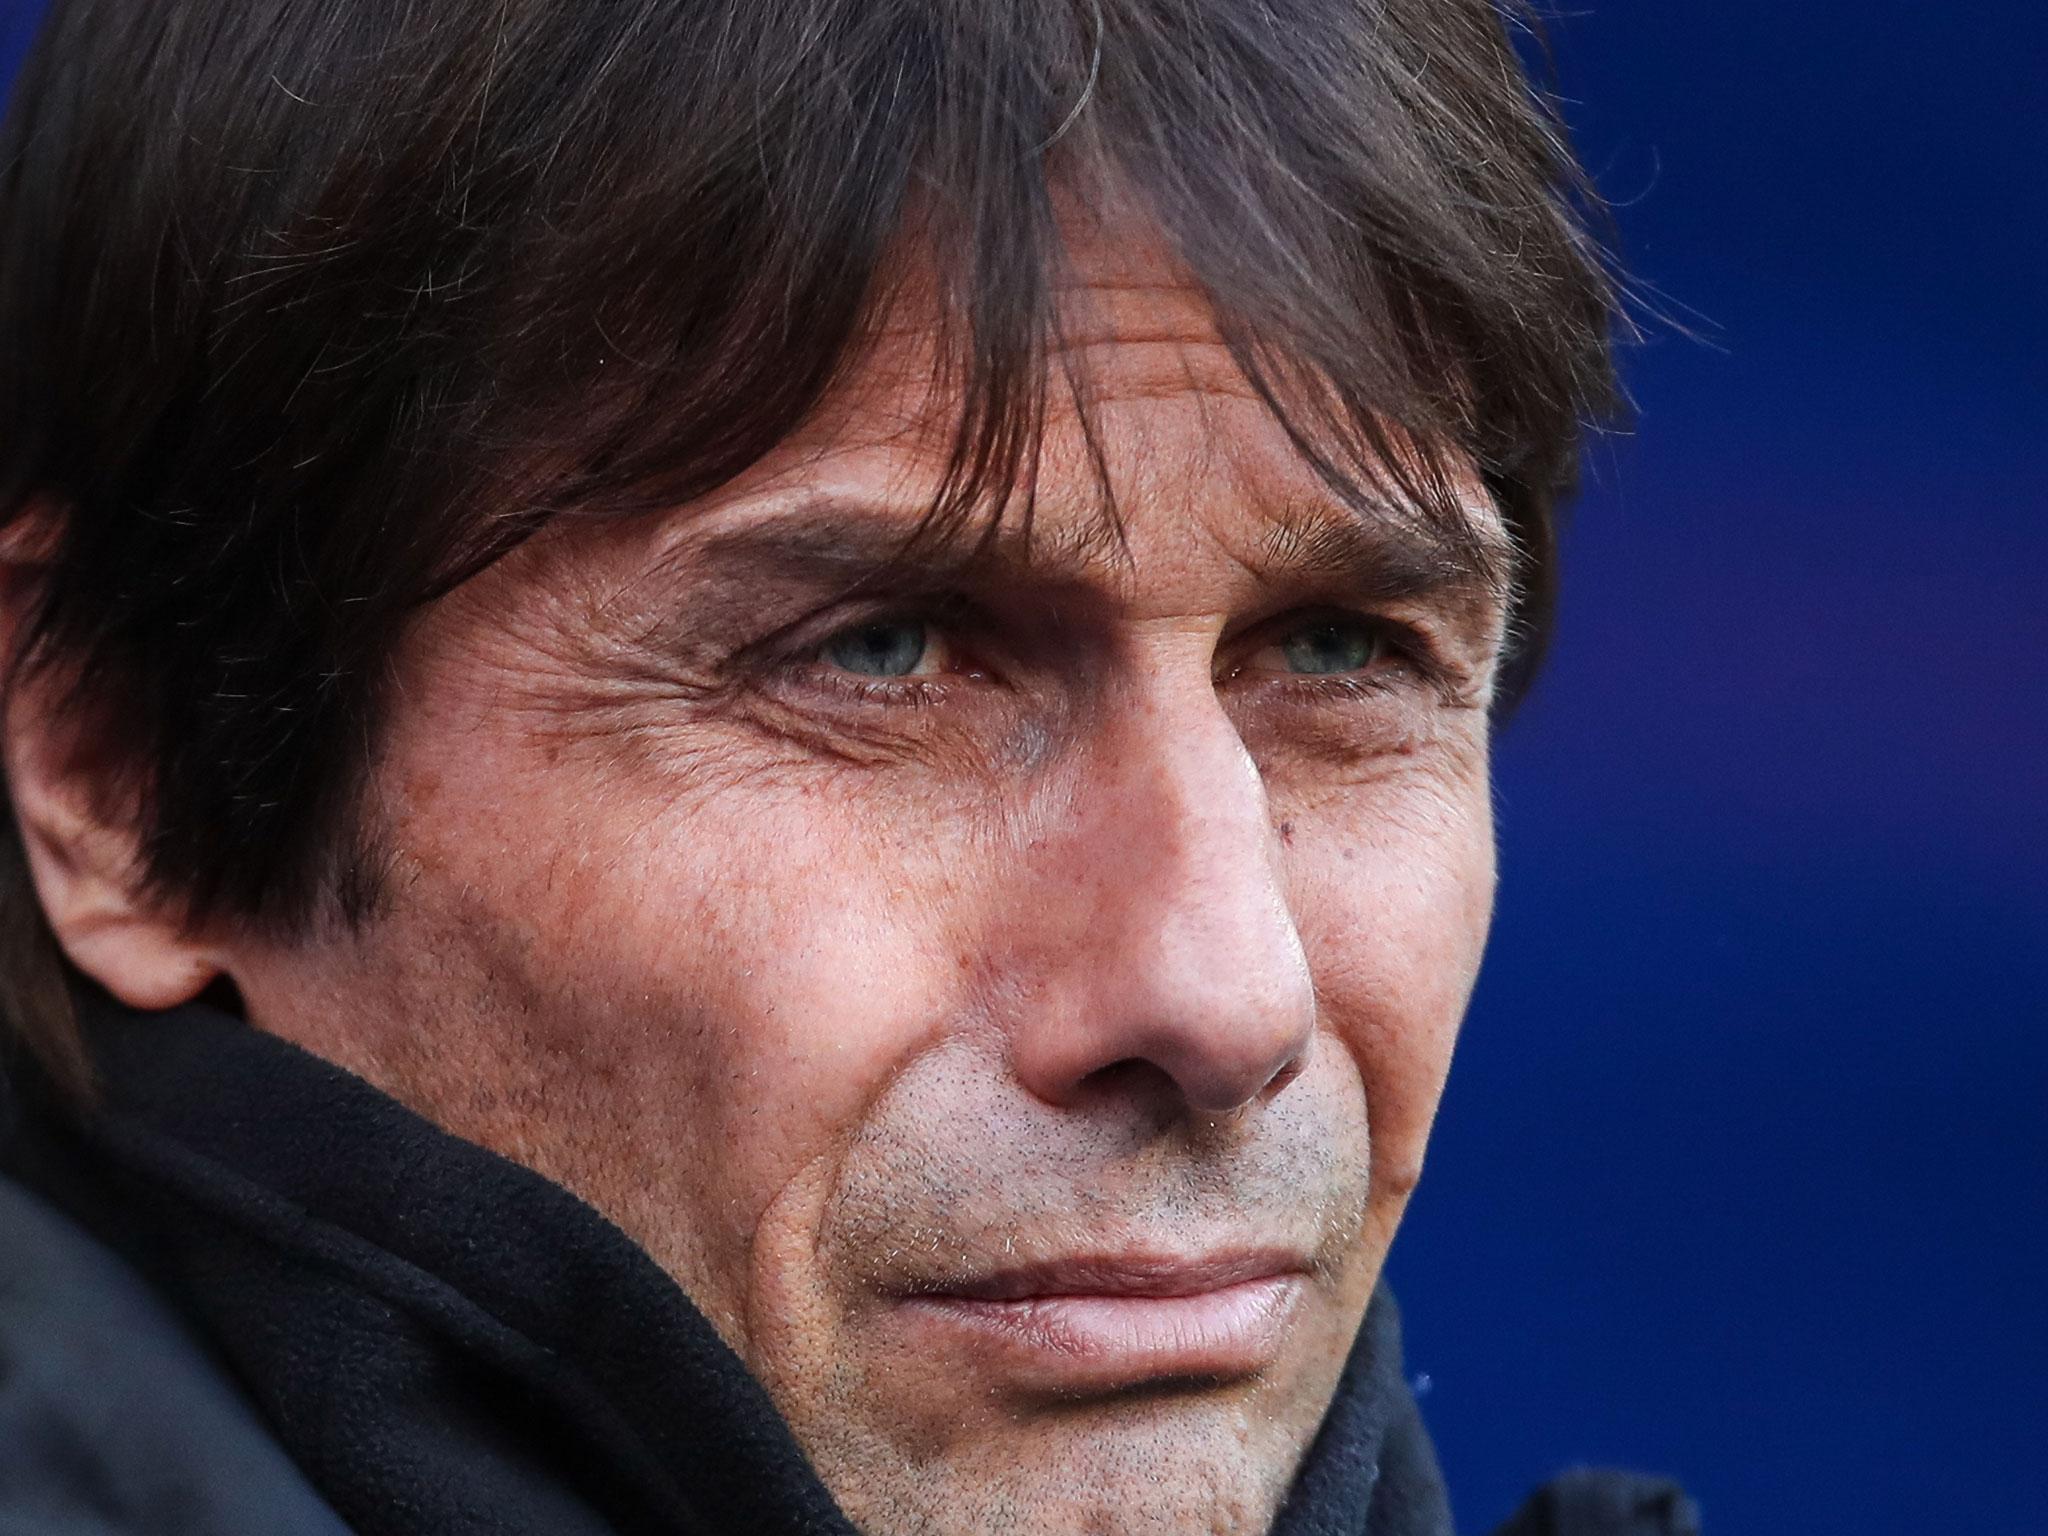 We know that Antonio Conte will start with a counter-attacking plan because of the threat of Barcelona's possession